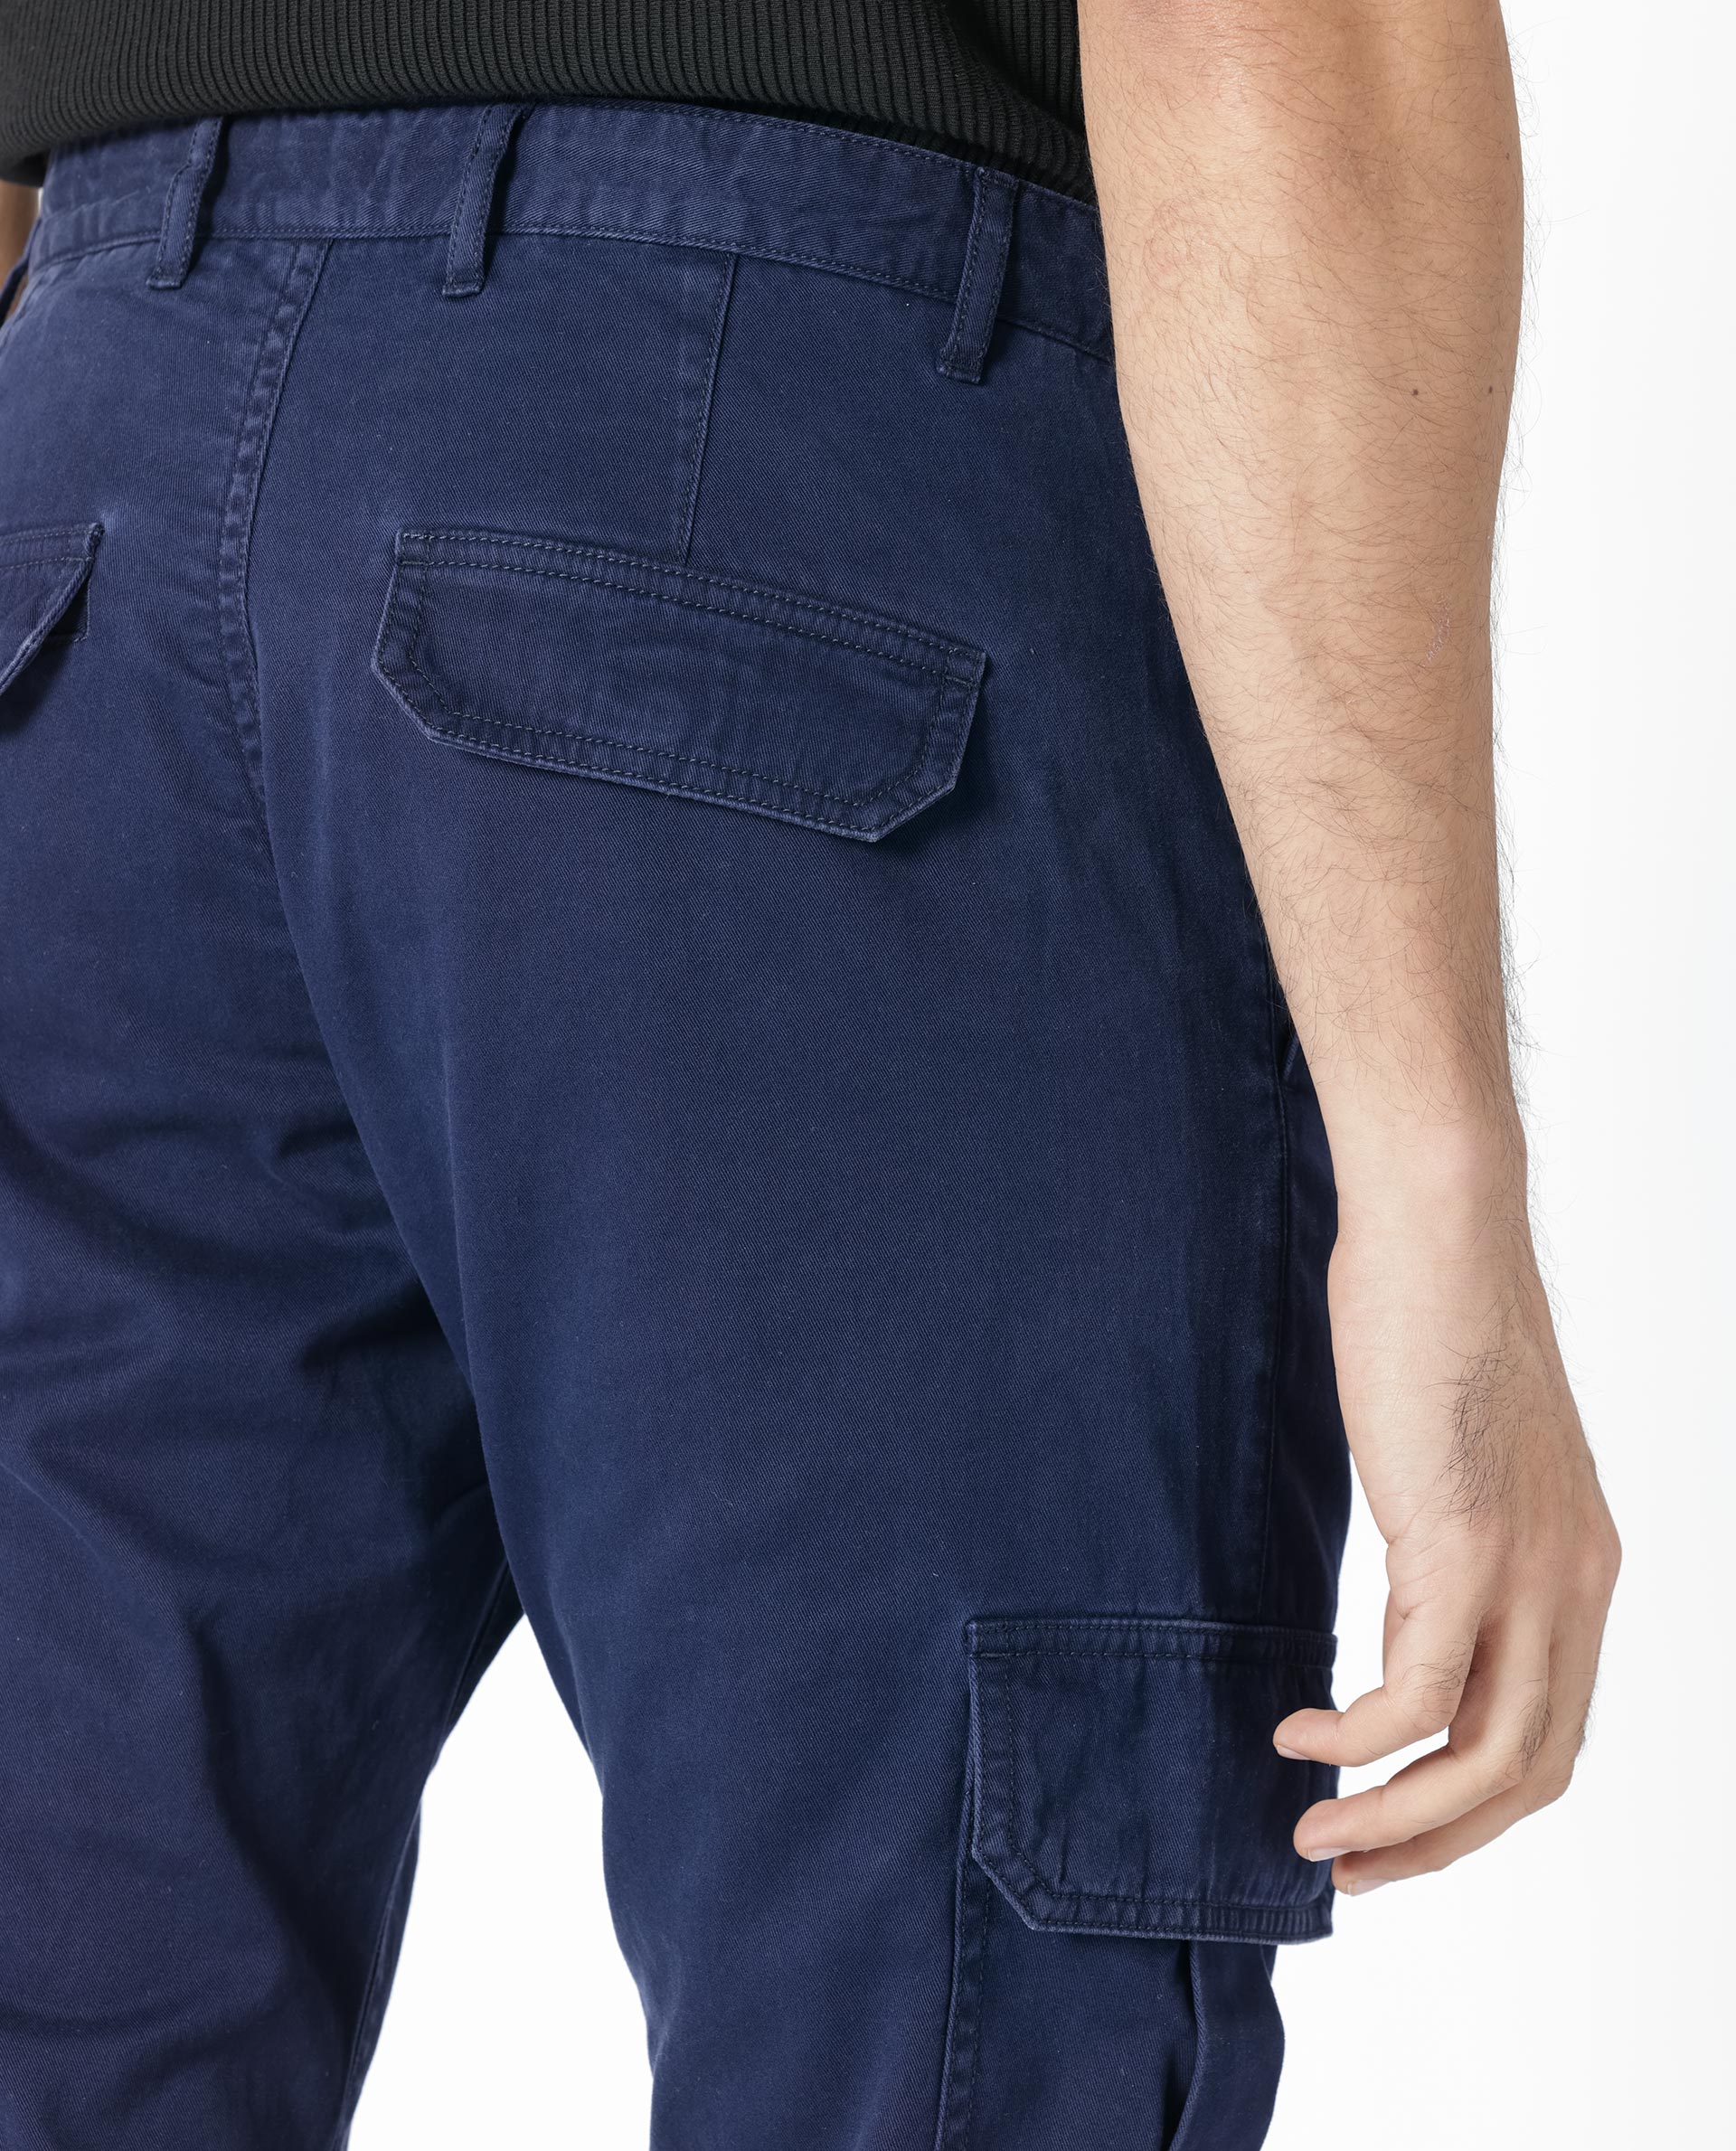 Next BELTED TECH CARGO TROUSERS RELAXED FIT - Cargo trousers - navy  blue/blue - Zalando.de